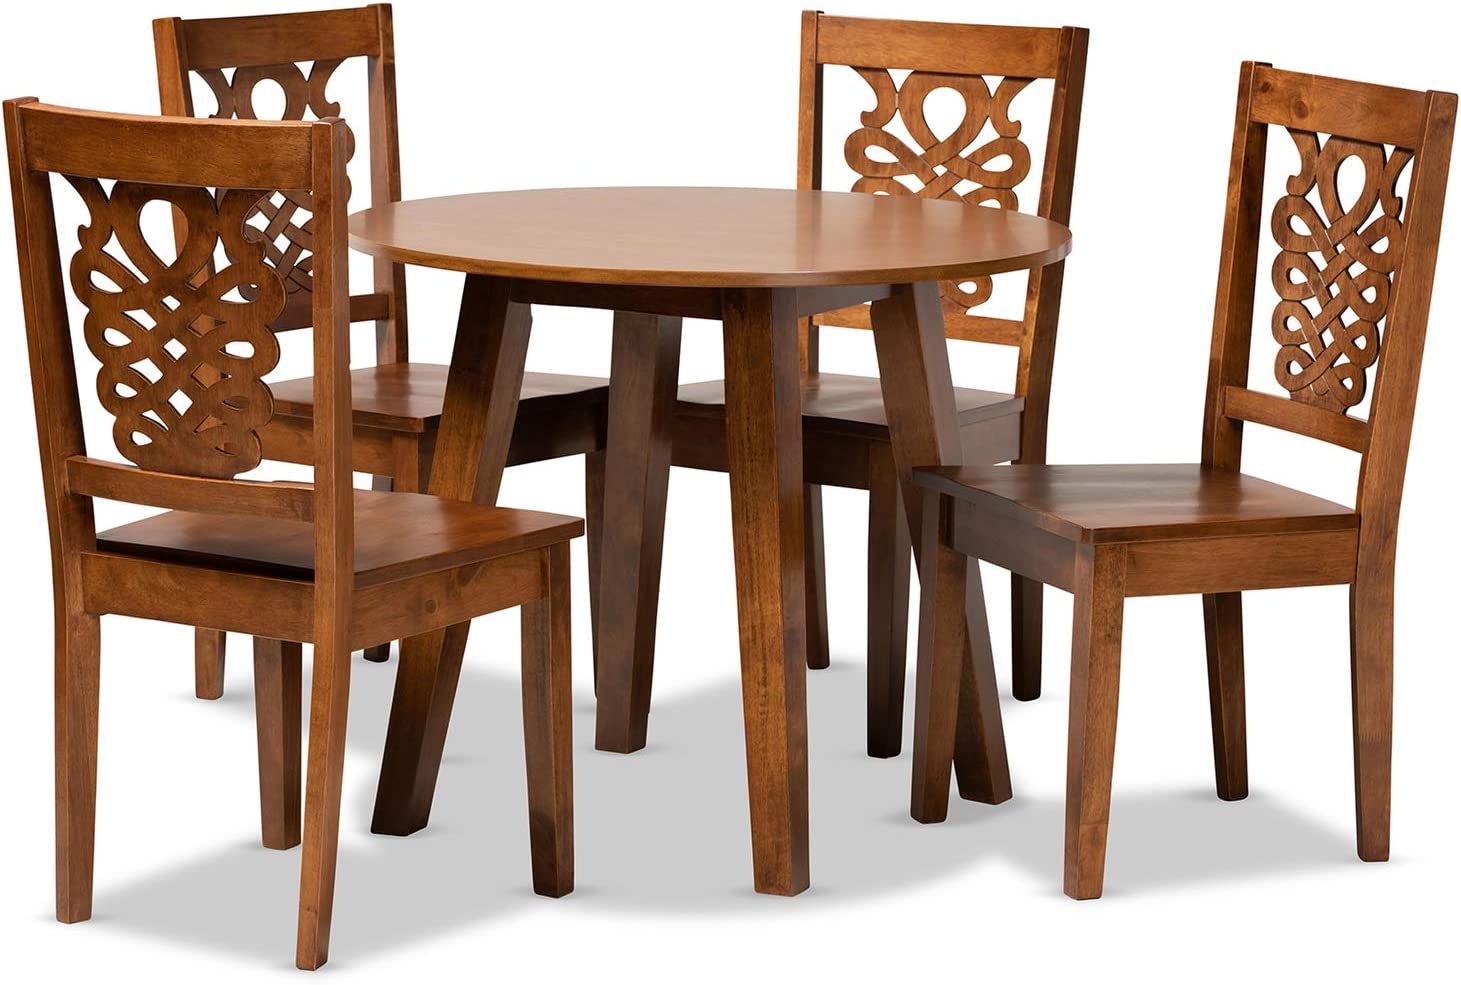 Baxton Studio Mina Modern and Contemporary Transitional Walnut Brown Finished Wood 5-Piece Dining Set